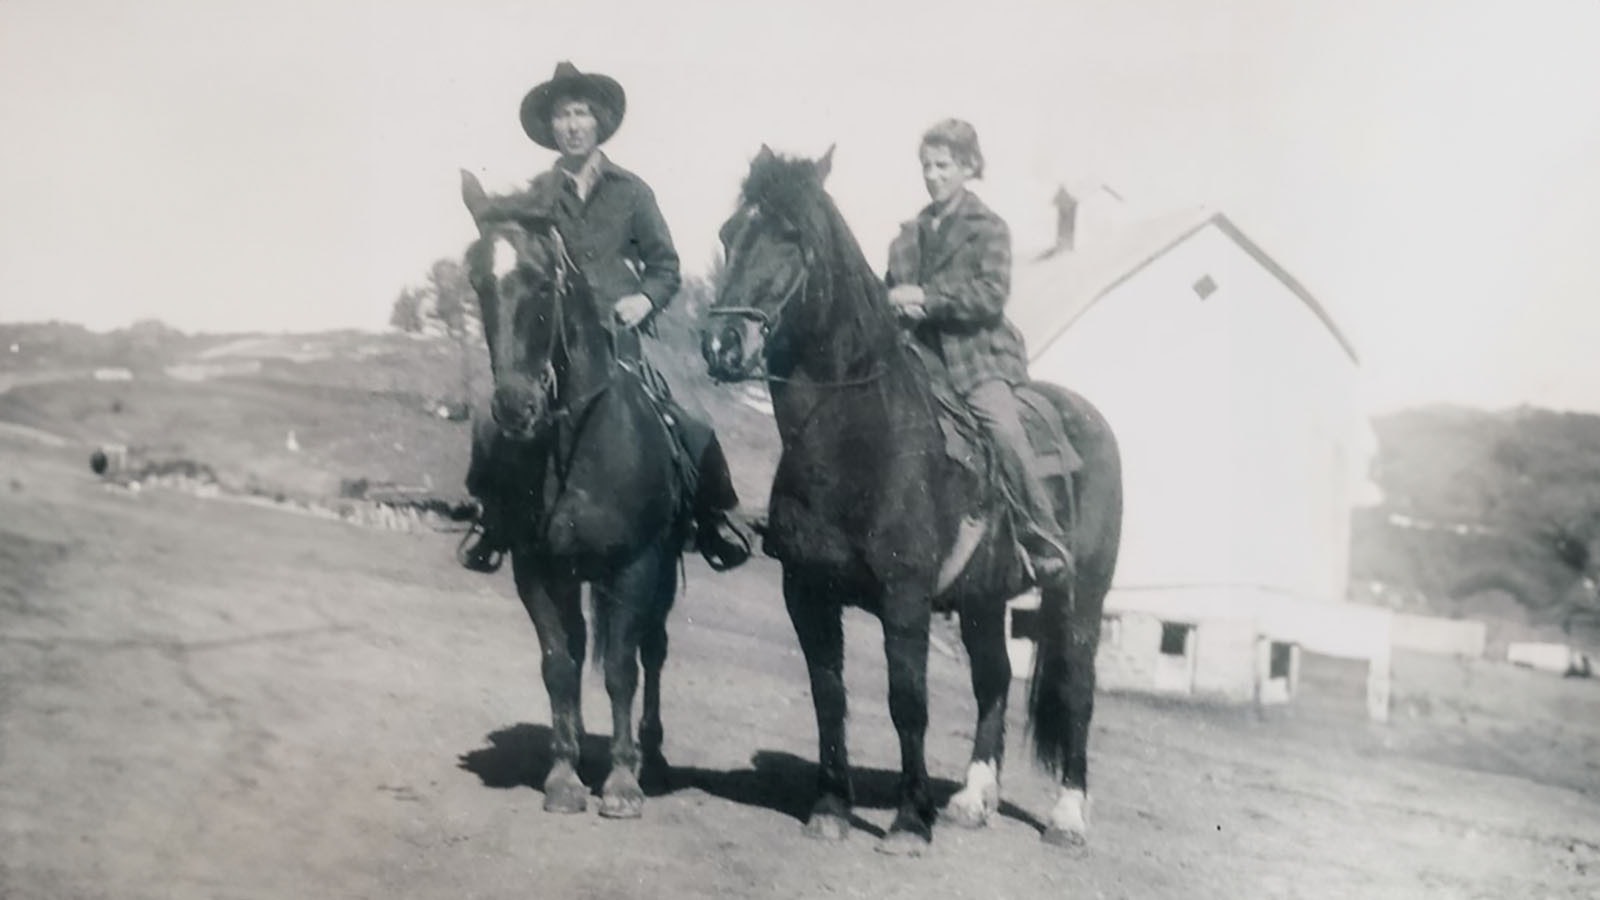 Matilda "Tillie" Bock Sewell earned a reputation as being cowboy tough and a true Wyoming cowboy around Weston County. She was often with her sister Clara.